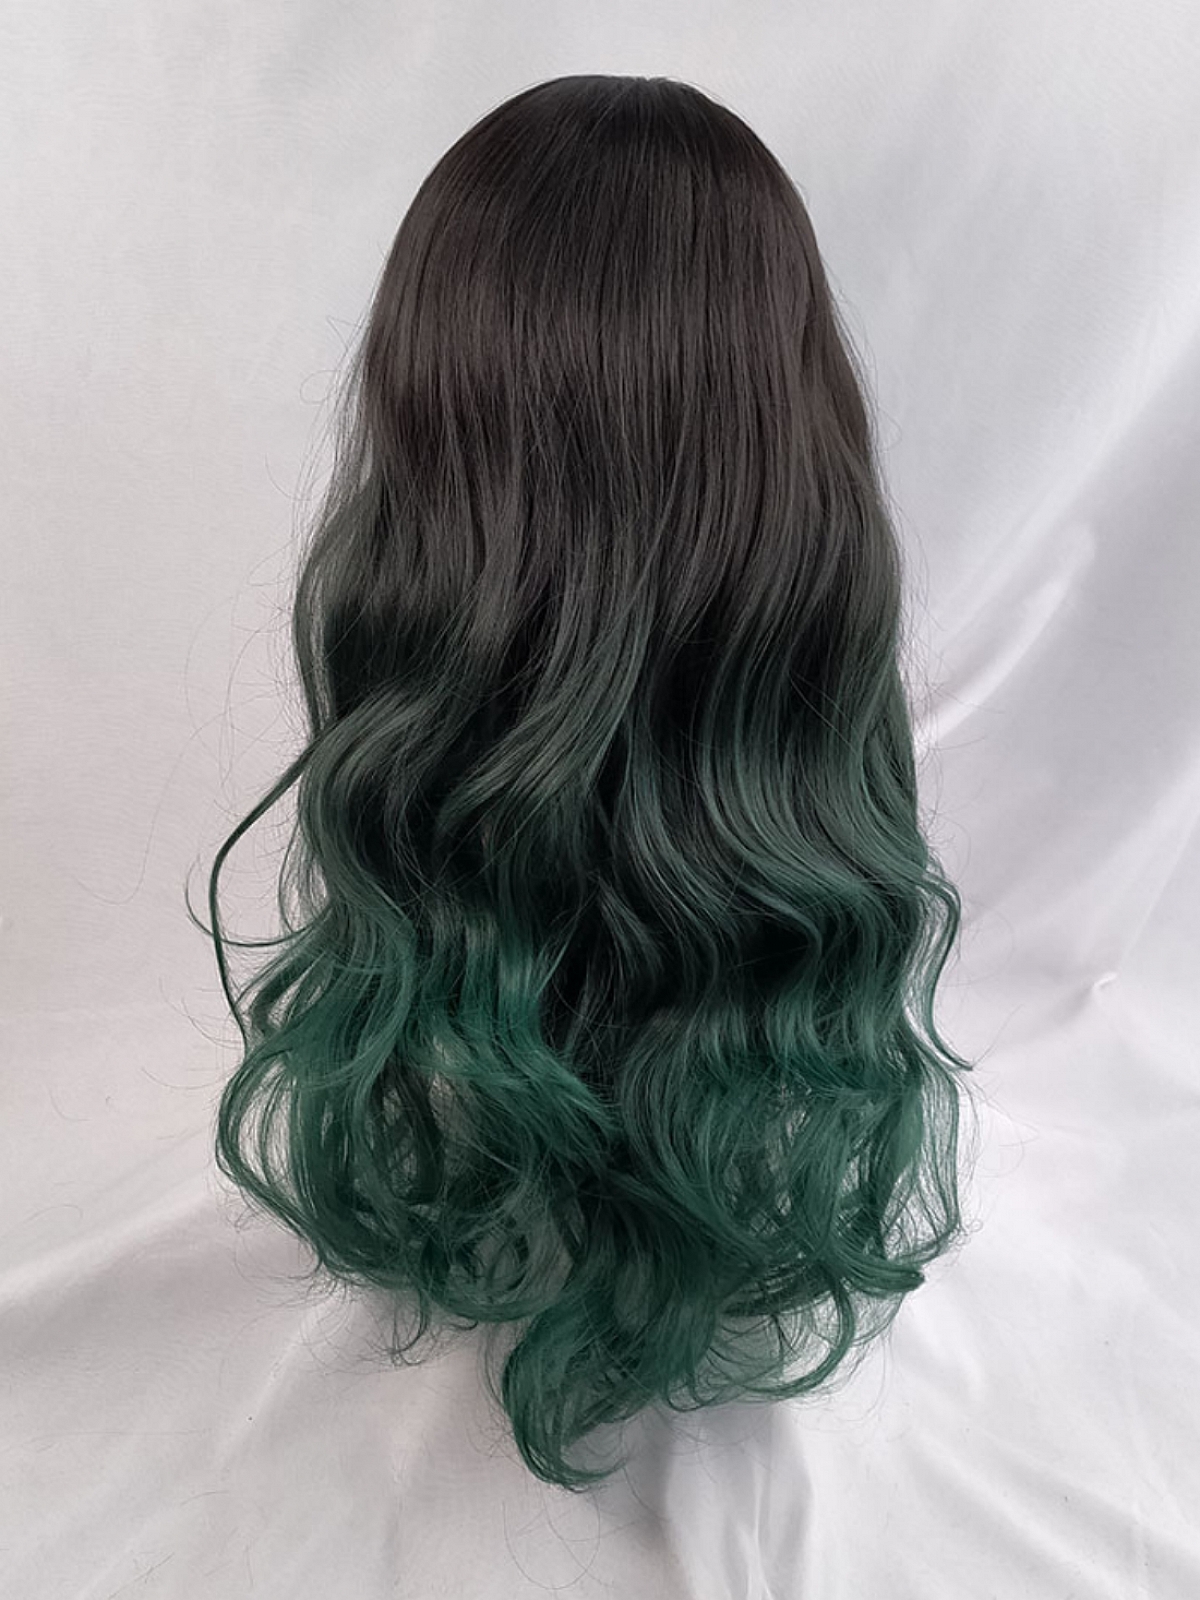 Evahair Dark to Green Ombre Long Wavy Synthetic Wig with Bangs - Home -  EvaHair